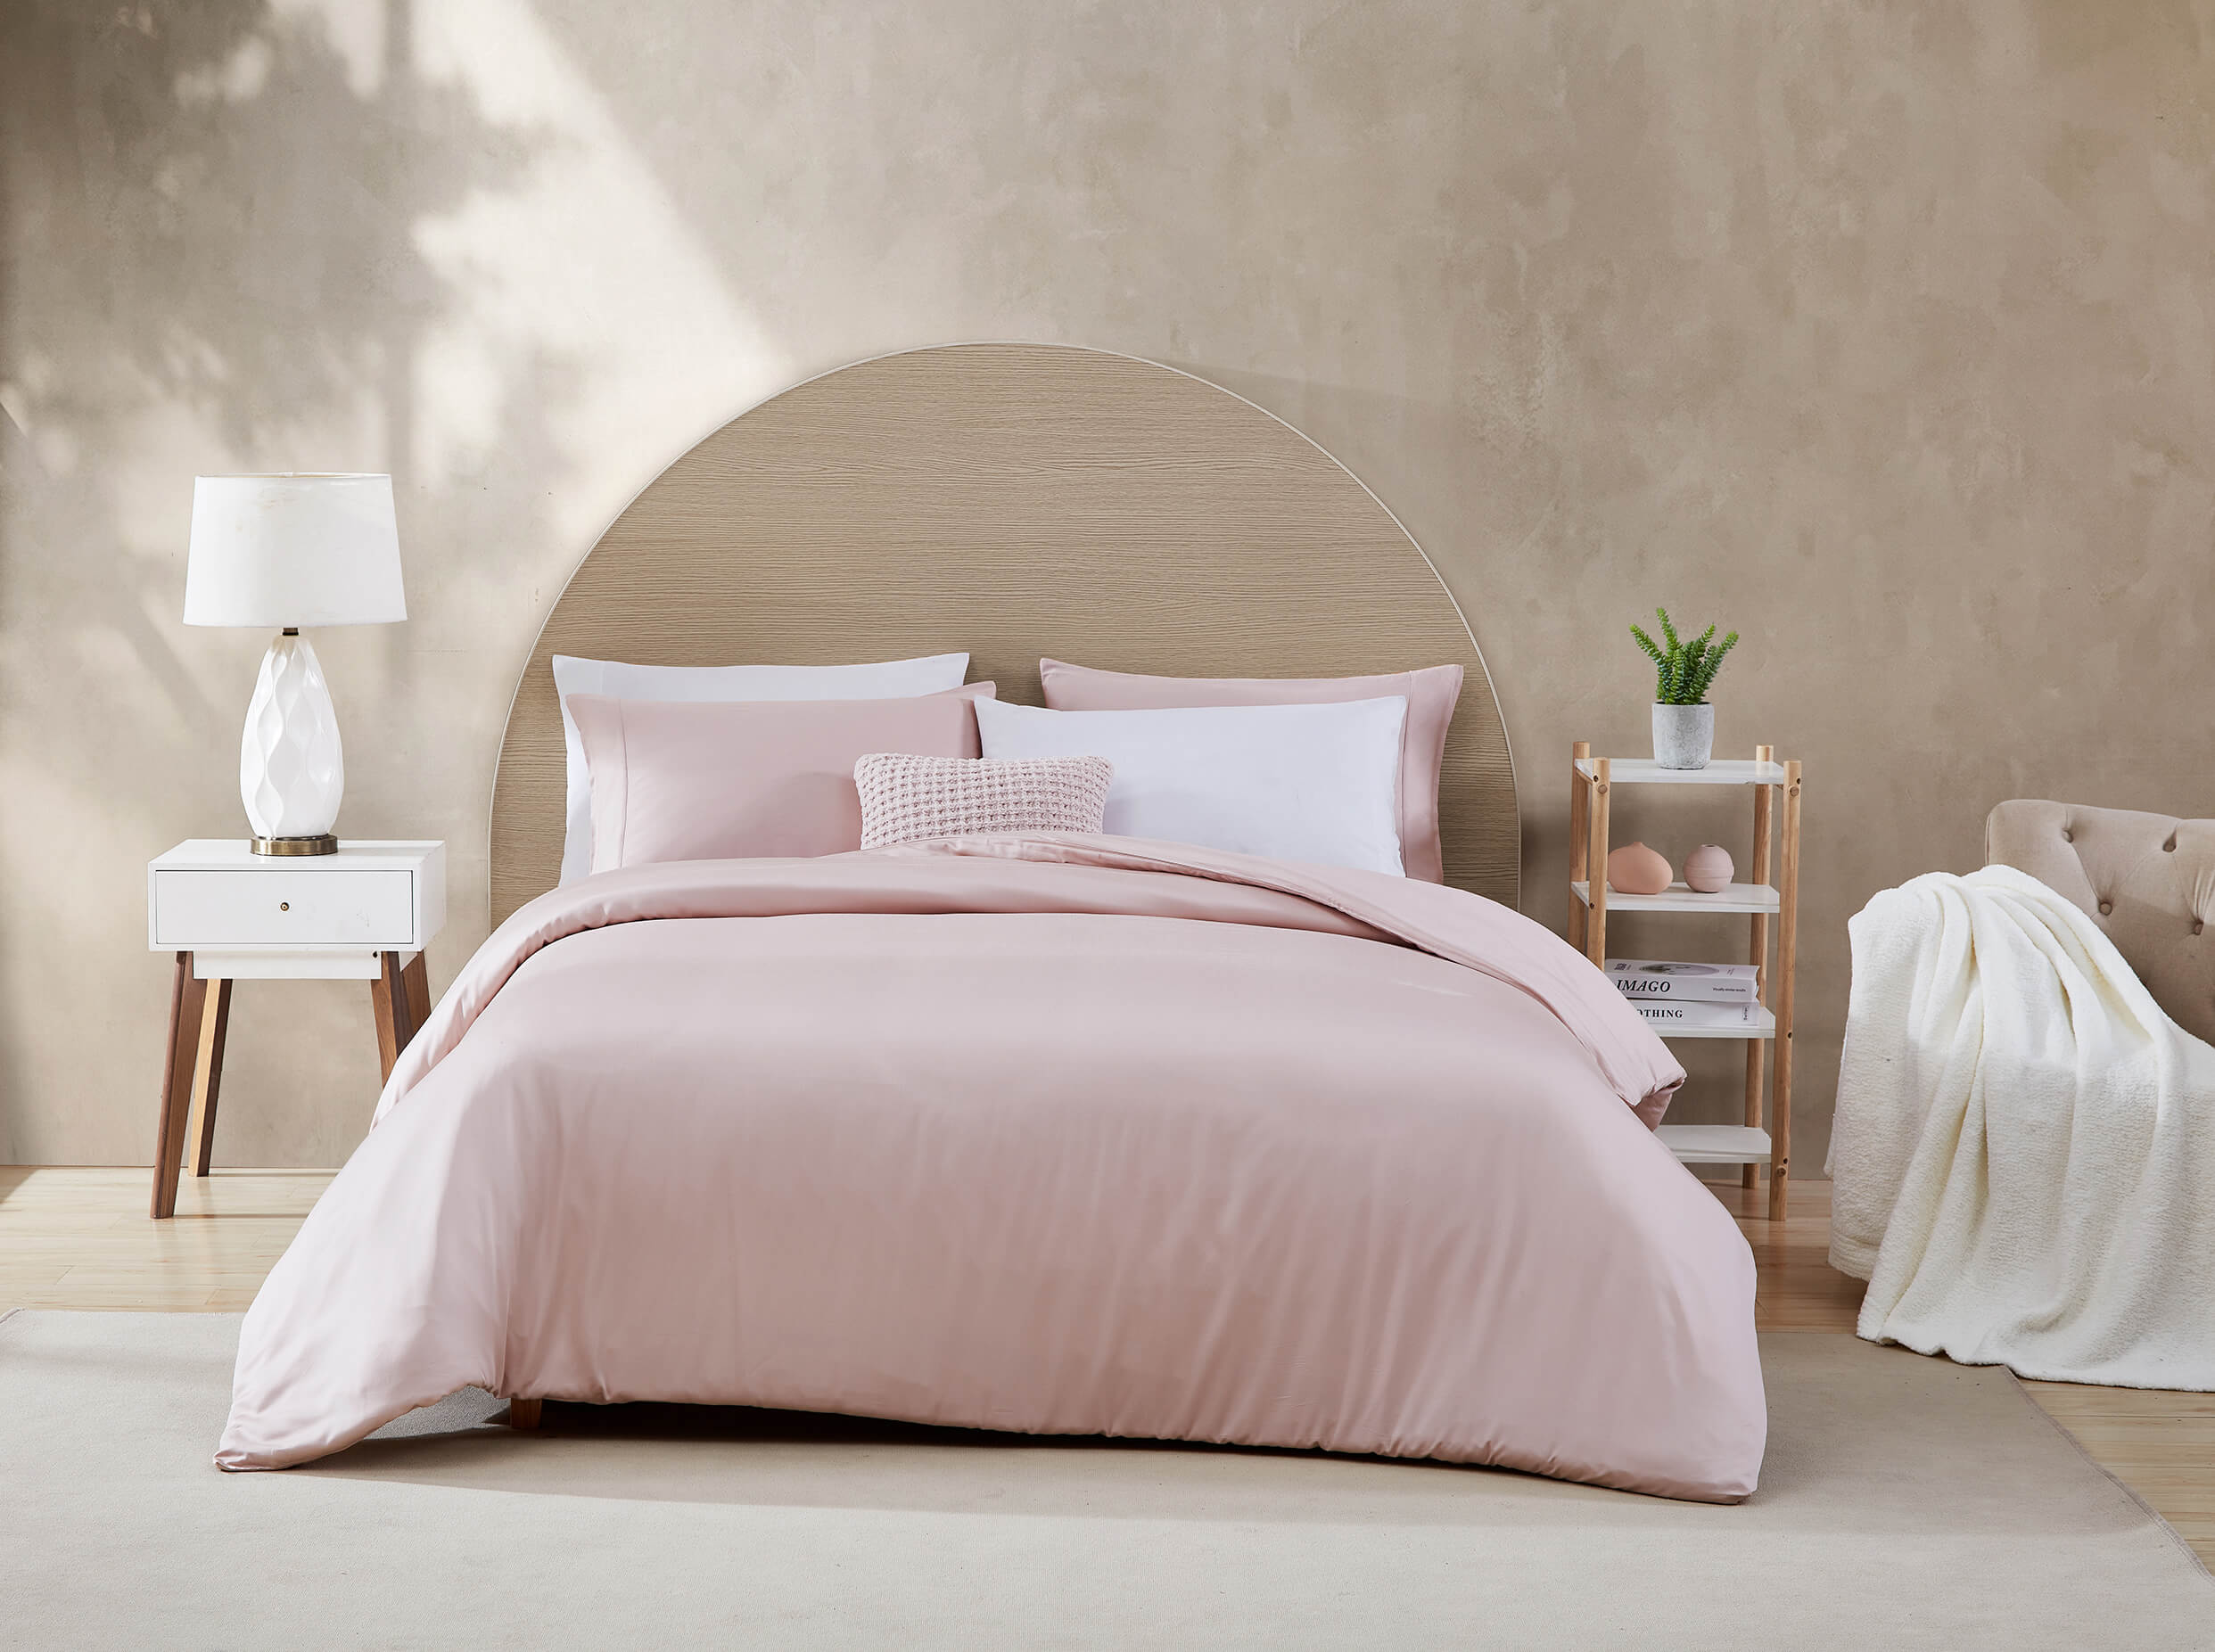 Pros and Cons of Bamboo Sheets. Sunday Citizen Premium Bamboo Duvet Cover in Blush. Premium Bamboo Collection in Blush Pink.